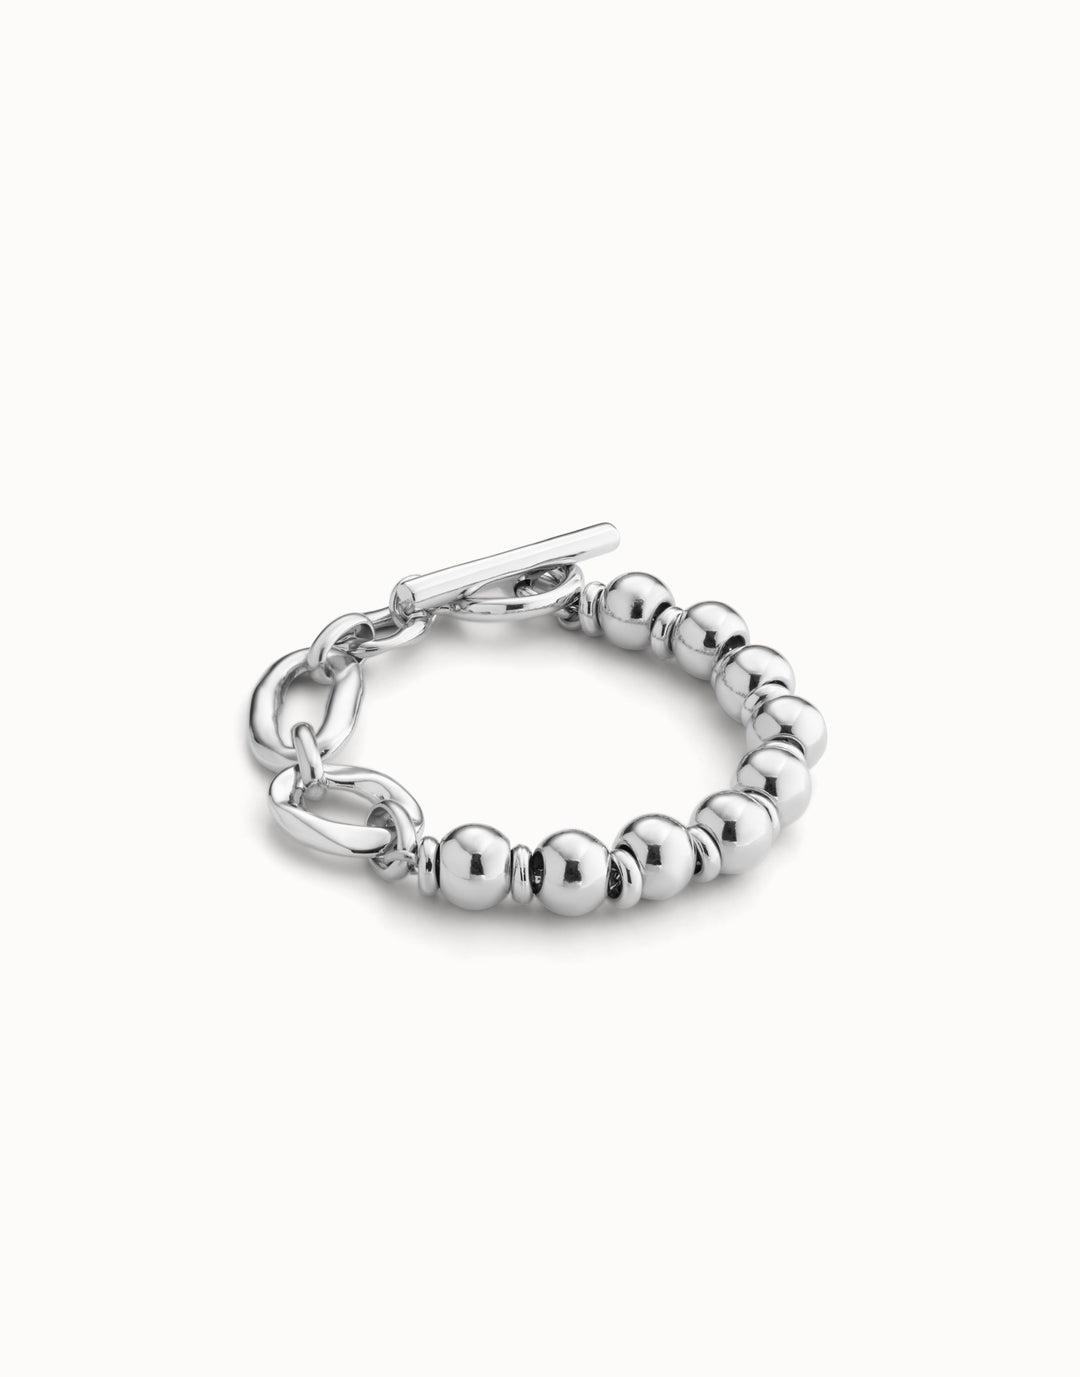 CHEERFUL TOGGLE BRACELET - LARGE - SILVER